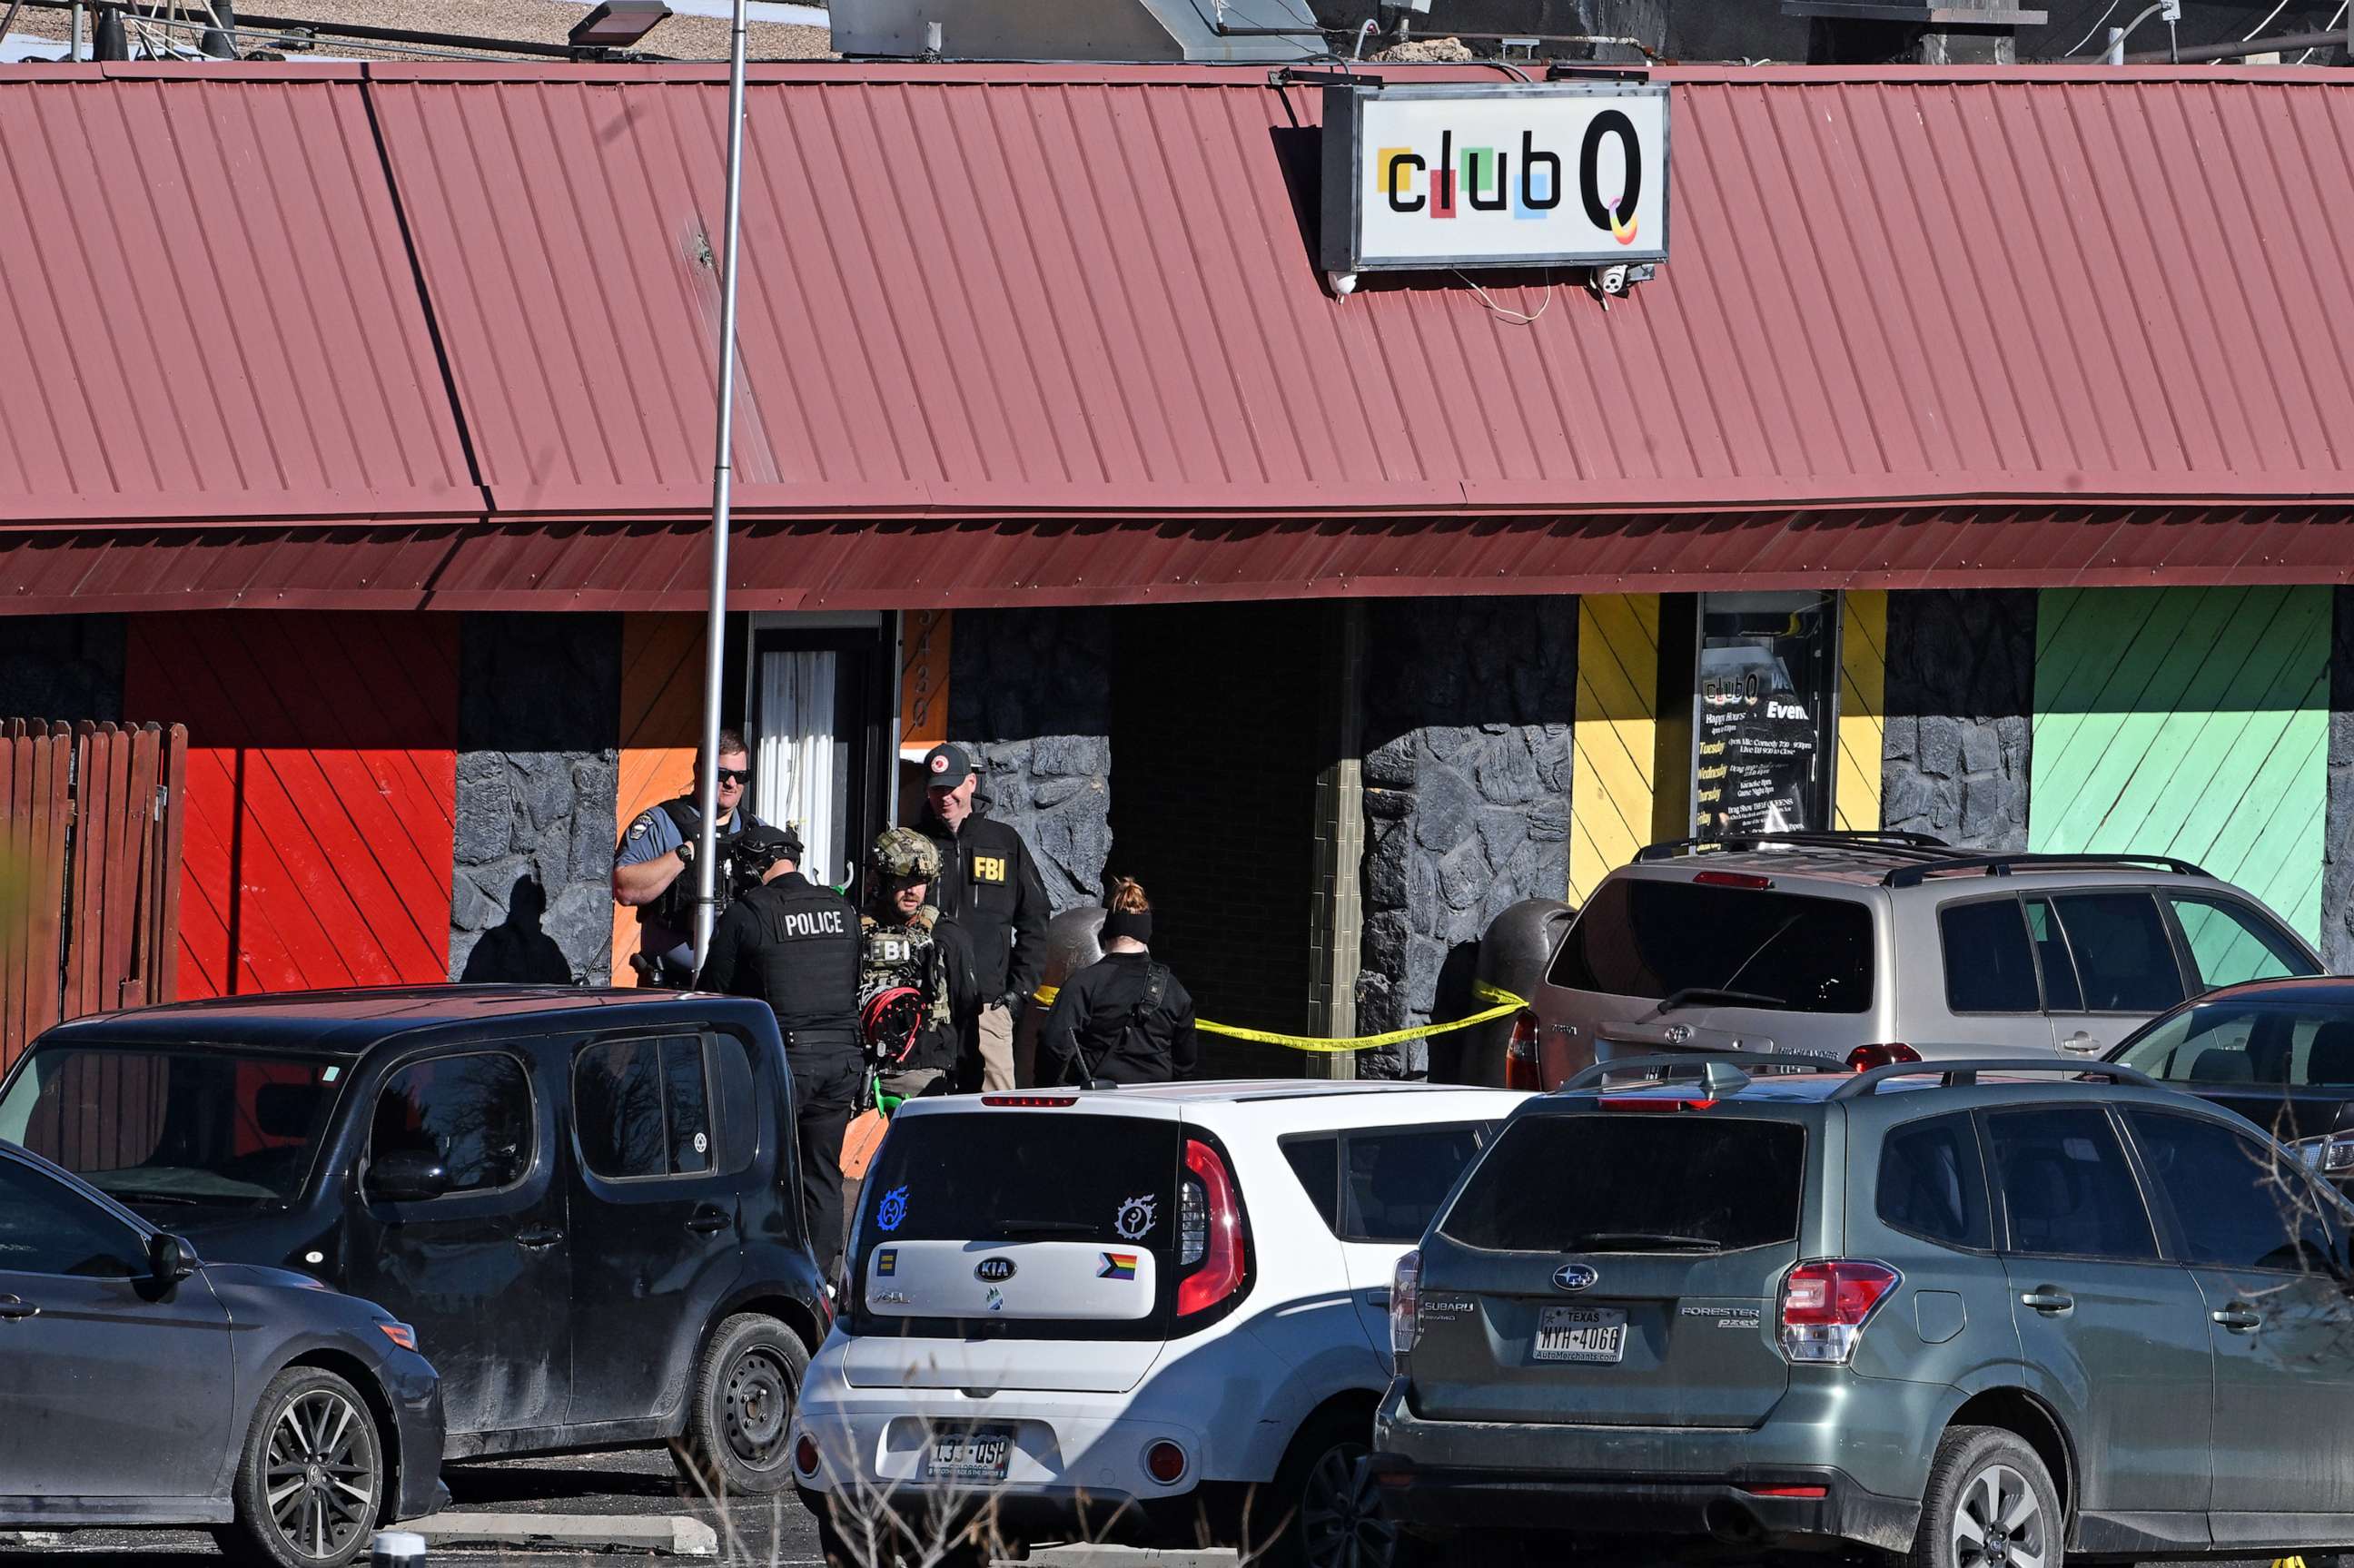 PHOTO: Colorado Springs police, the FBI and others investigate the scene of a mass shooting at Club Q on Nov. 20, 2022 in Colorado Springs, Colo.